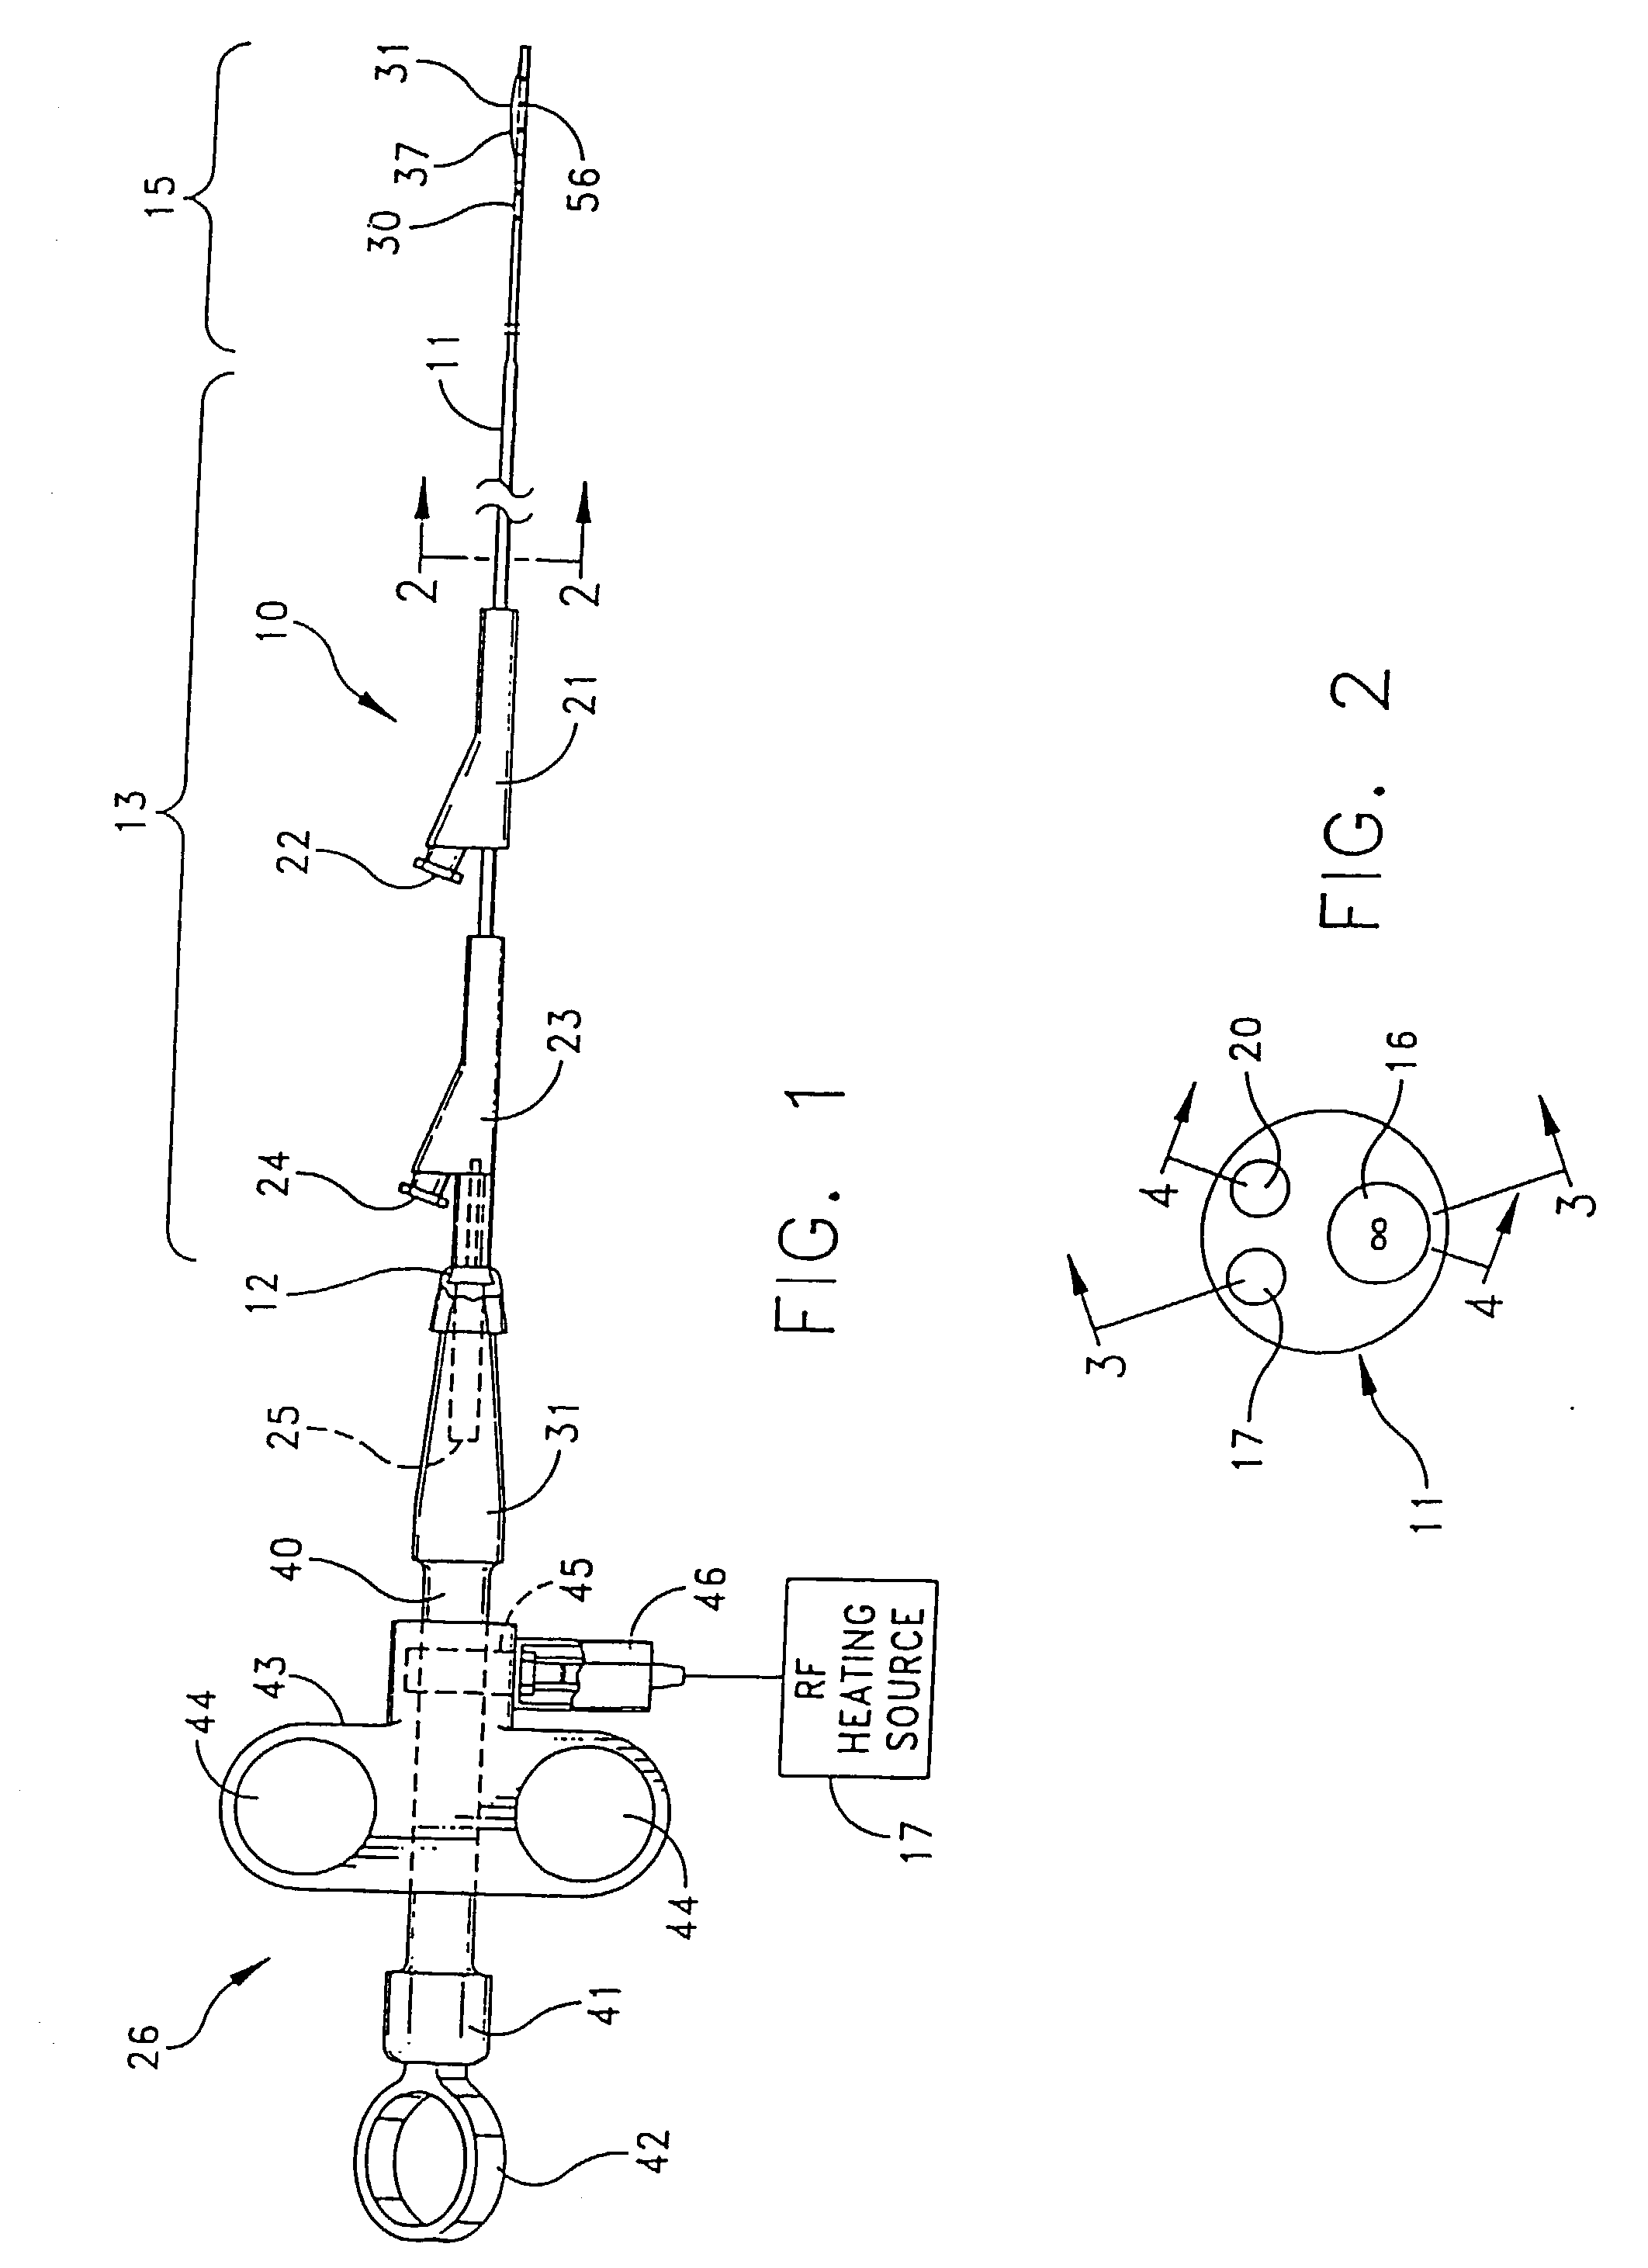 Apparatus for performing diagnostic and therapeutic modalities in the biliary tree